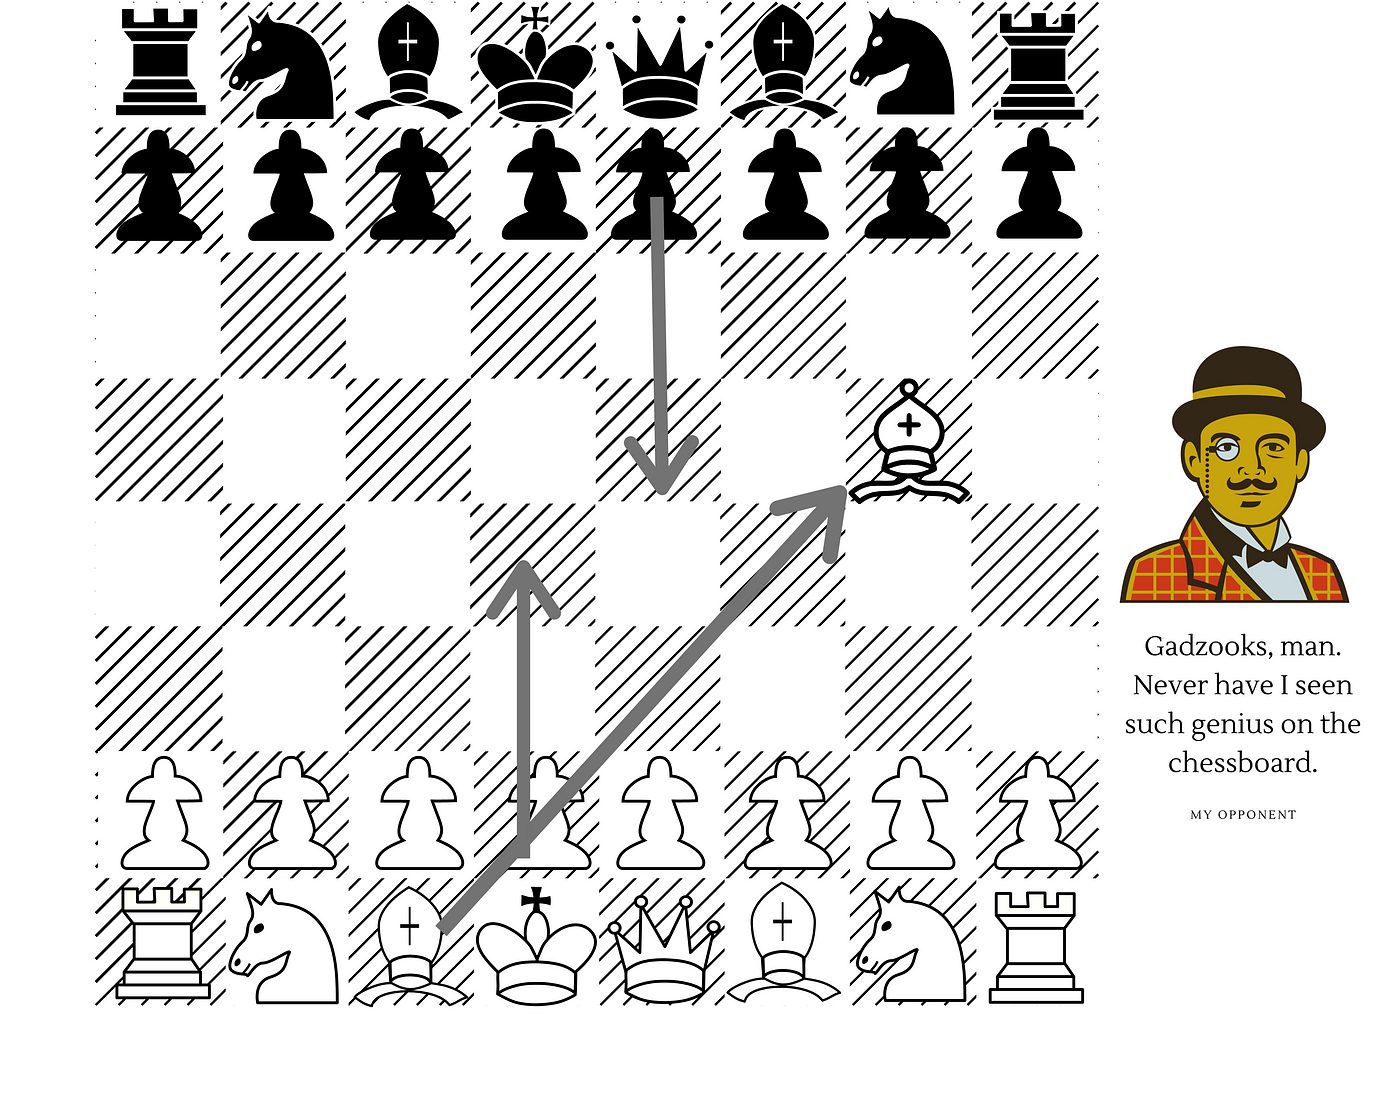 In chess, do you have to let your opponent know they are in check? - Quora